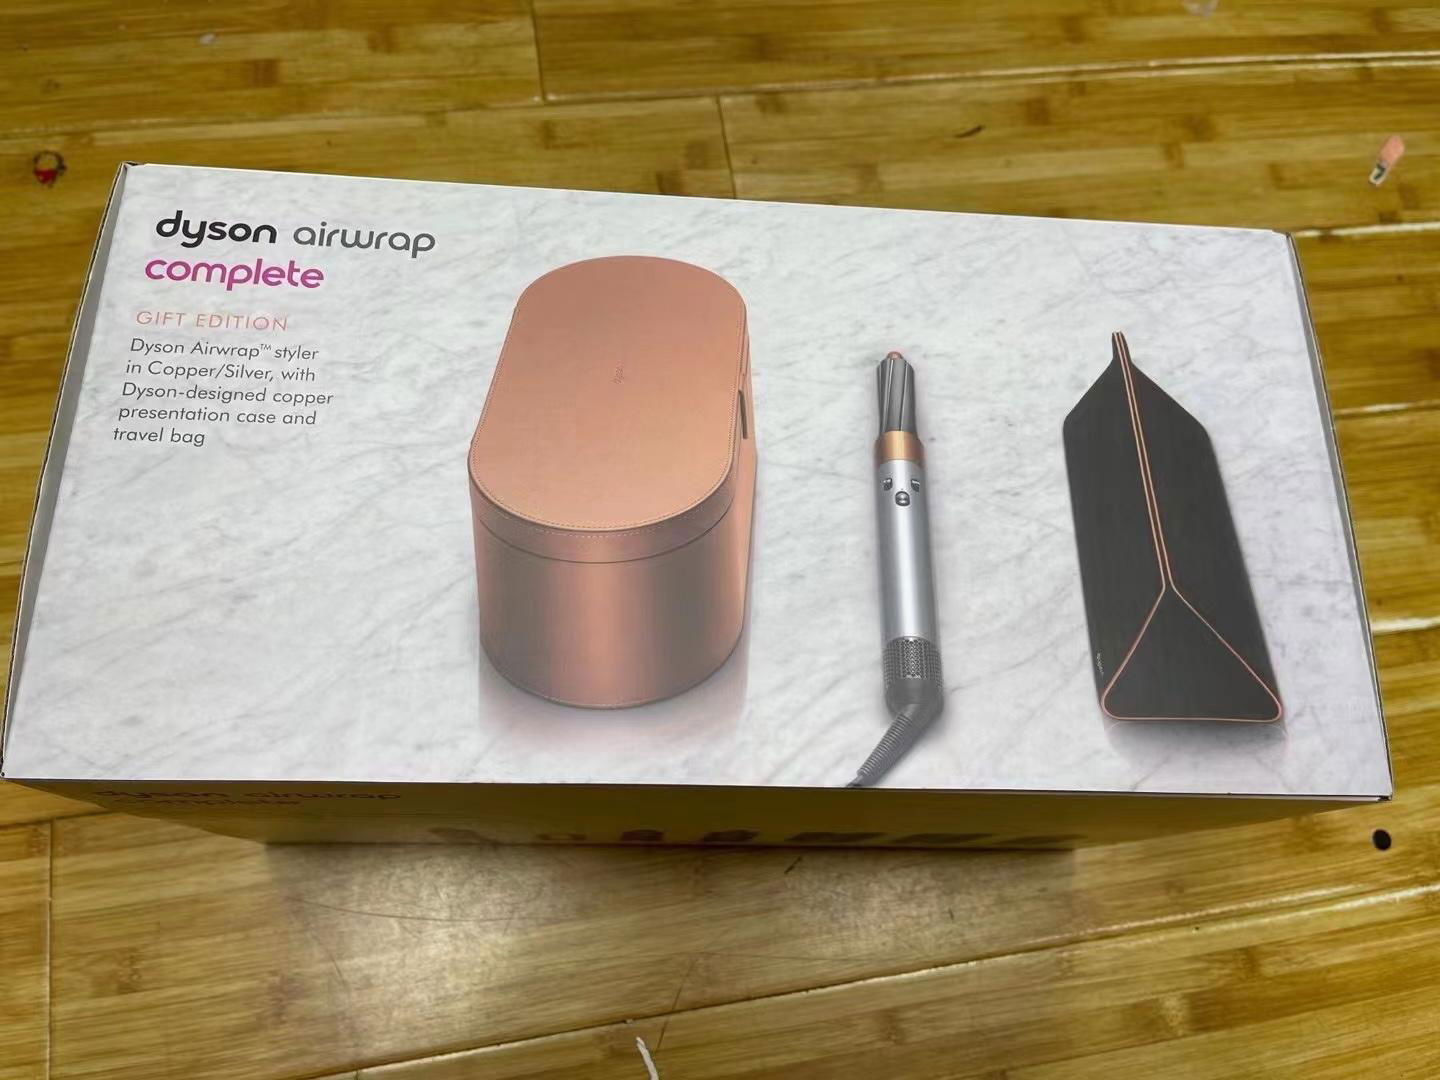 Buy Dyson Airwrap Gift Edition Copper & Sliver Discount Price 2